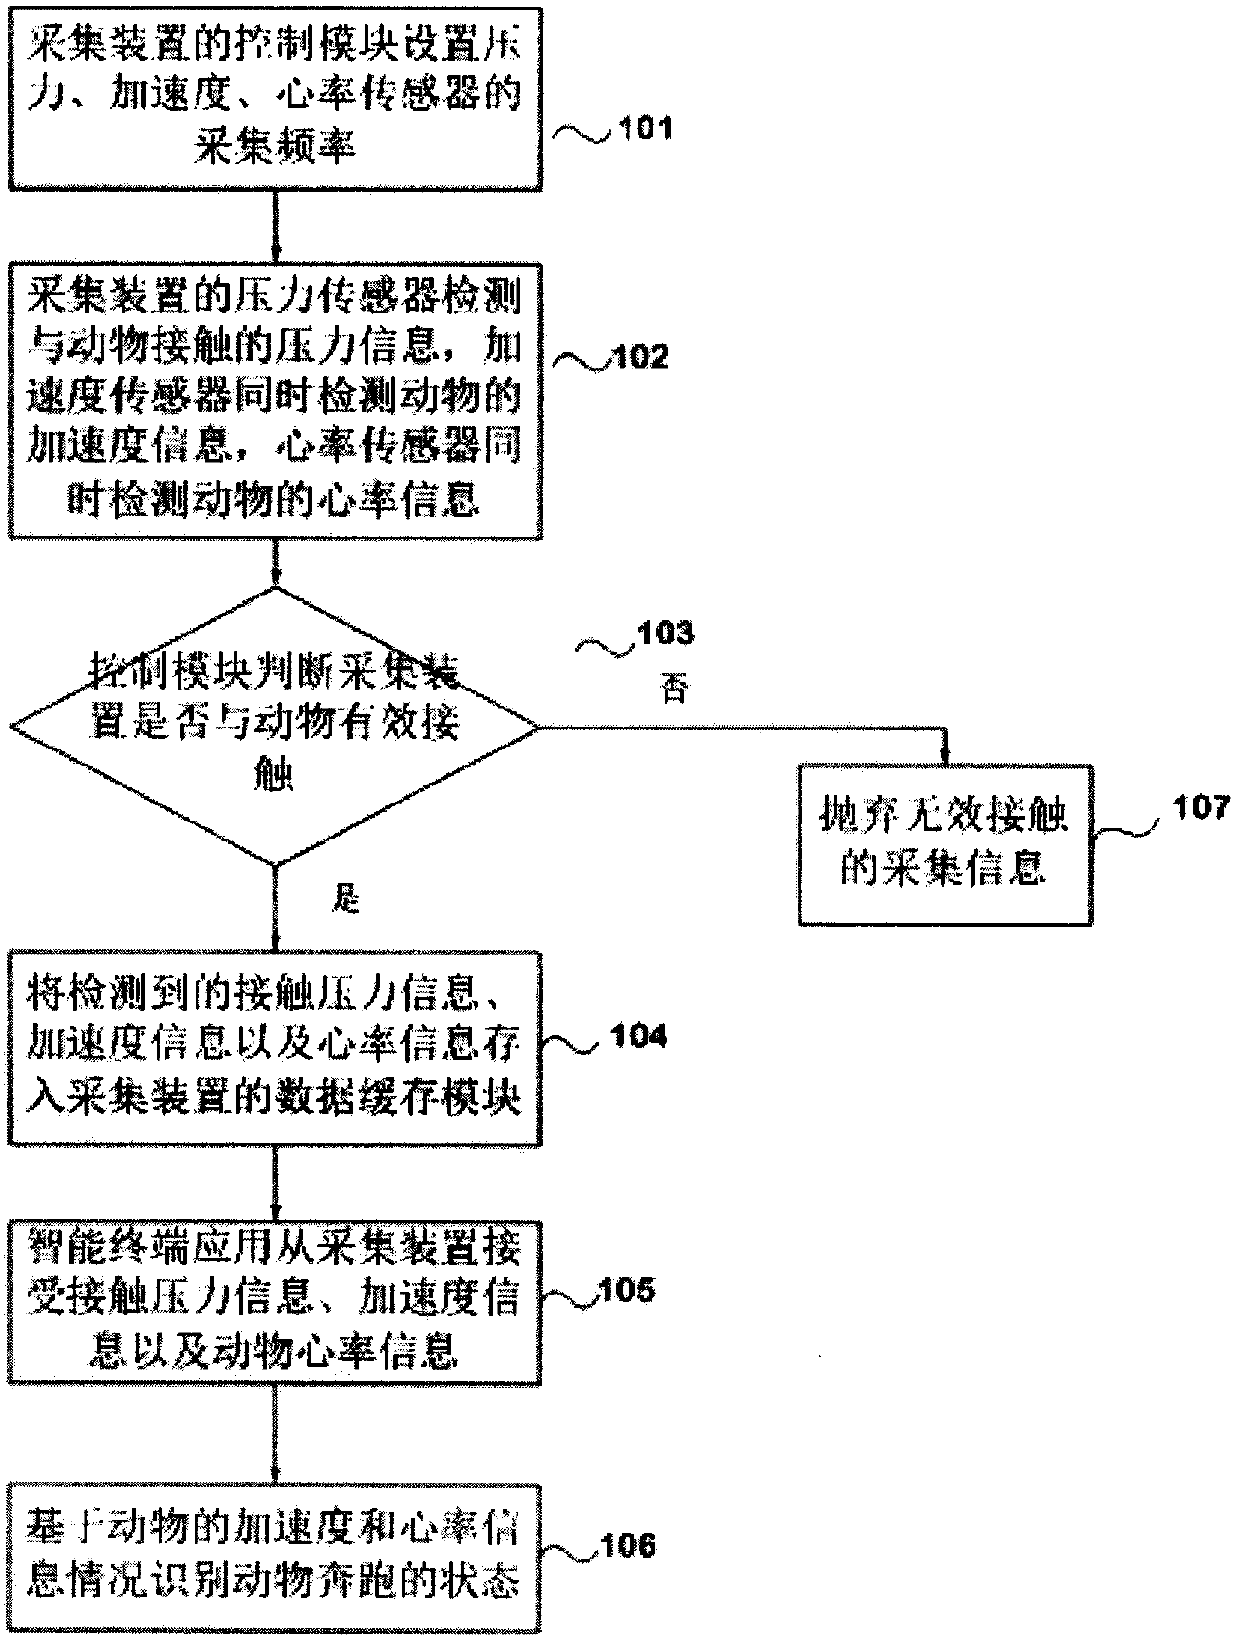 Animal running monitoring system and running state recognition method based on neural network